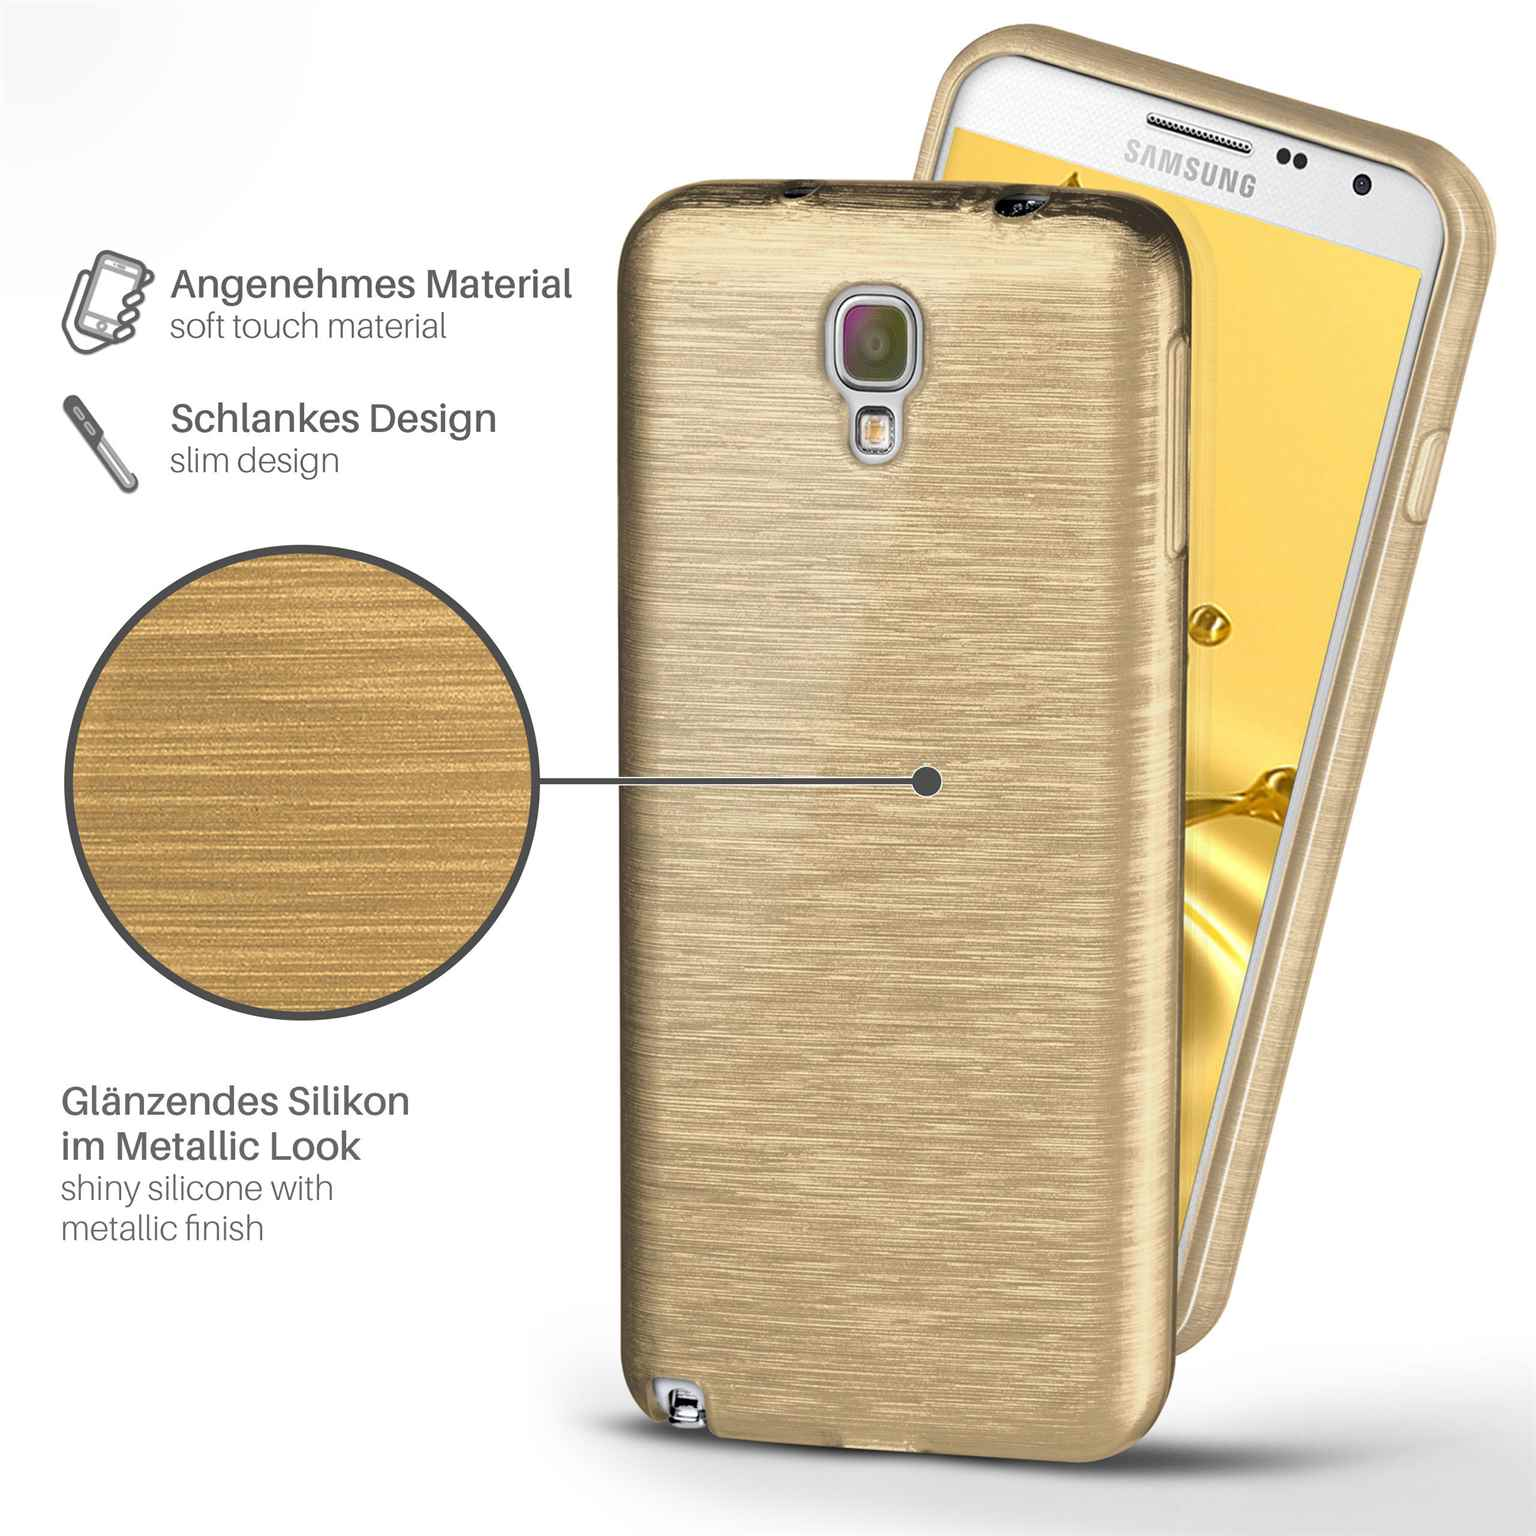 Case, MOEX Backcover, Note Neo, 3 Samsung, Brushed Ivory-Gold Galaxy